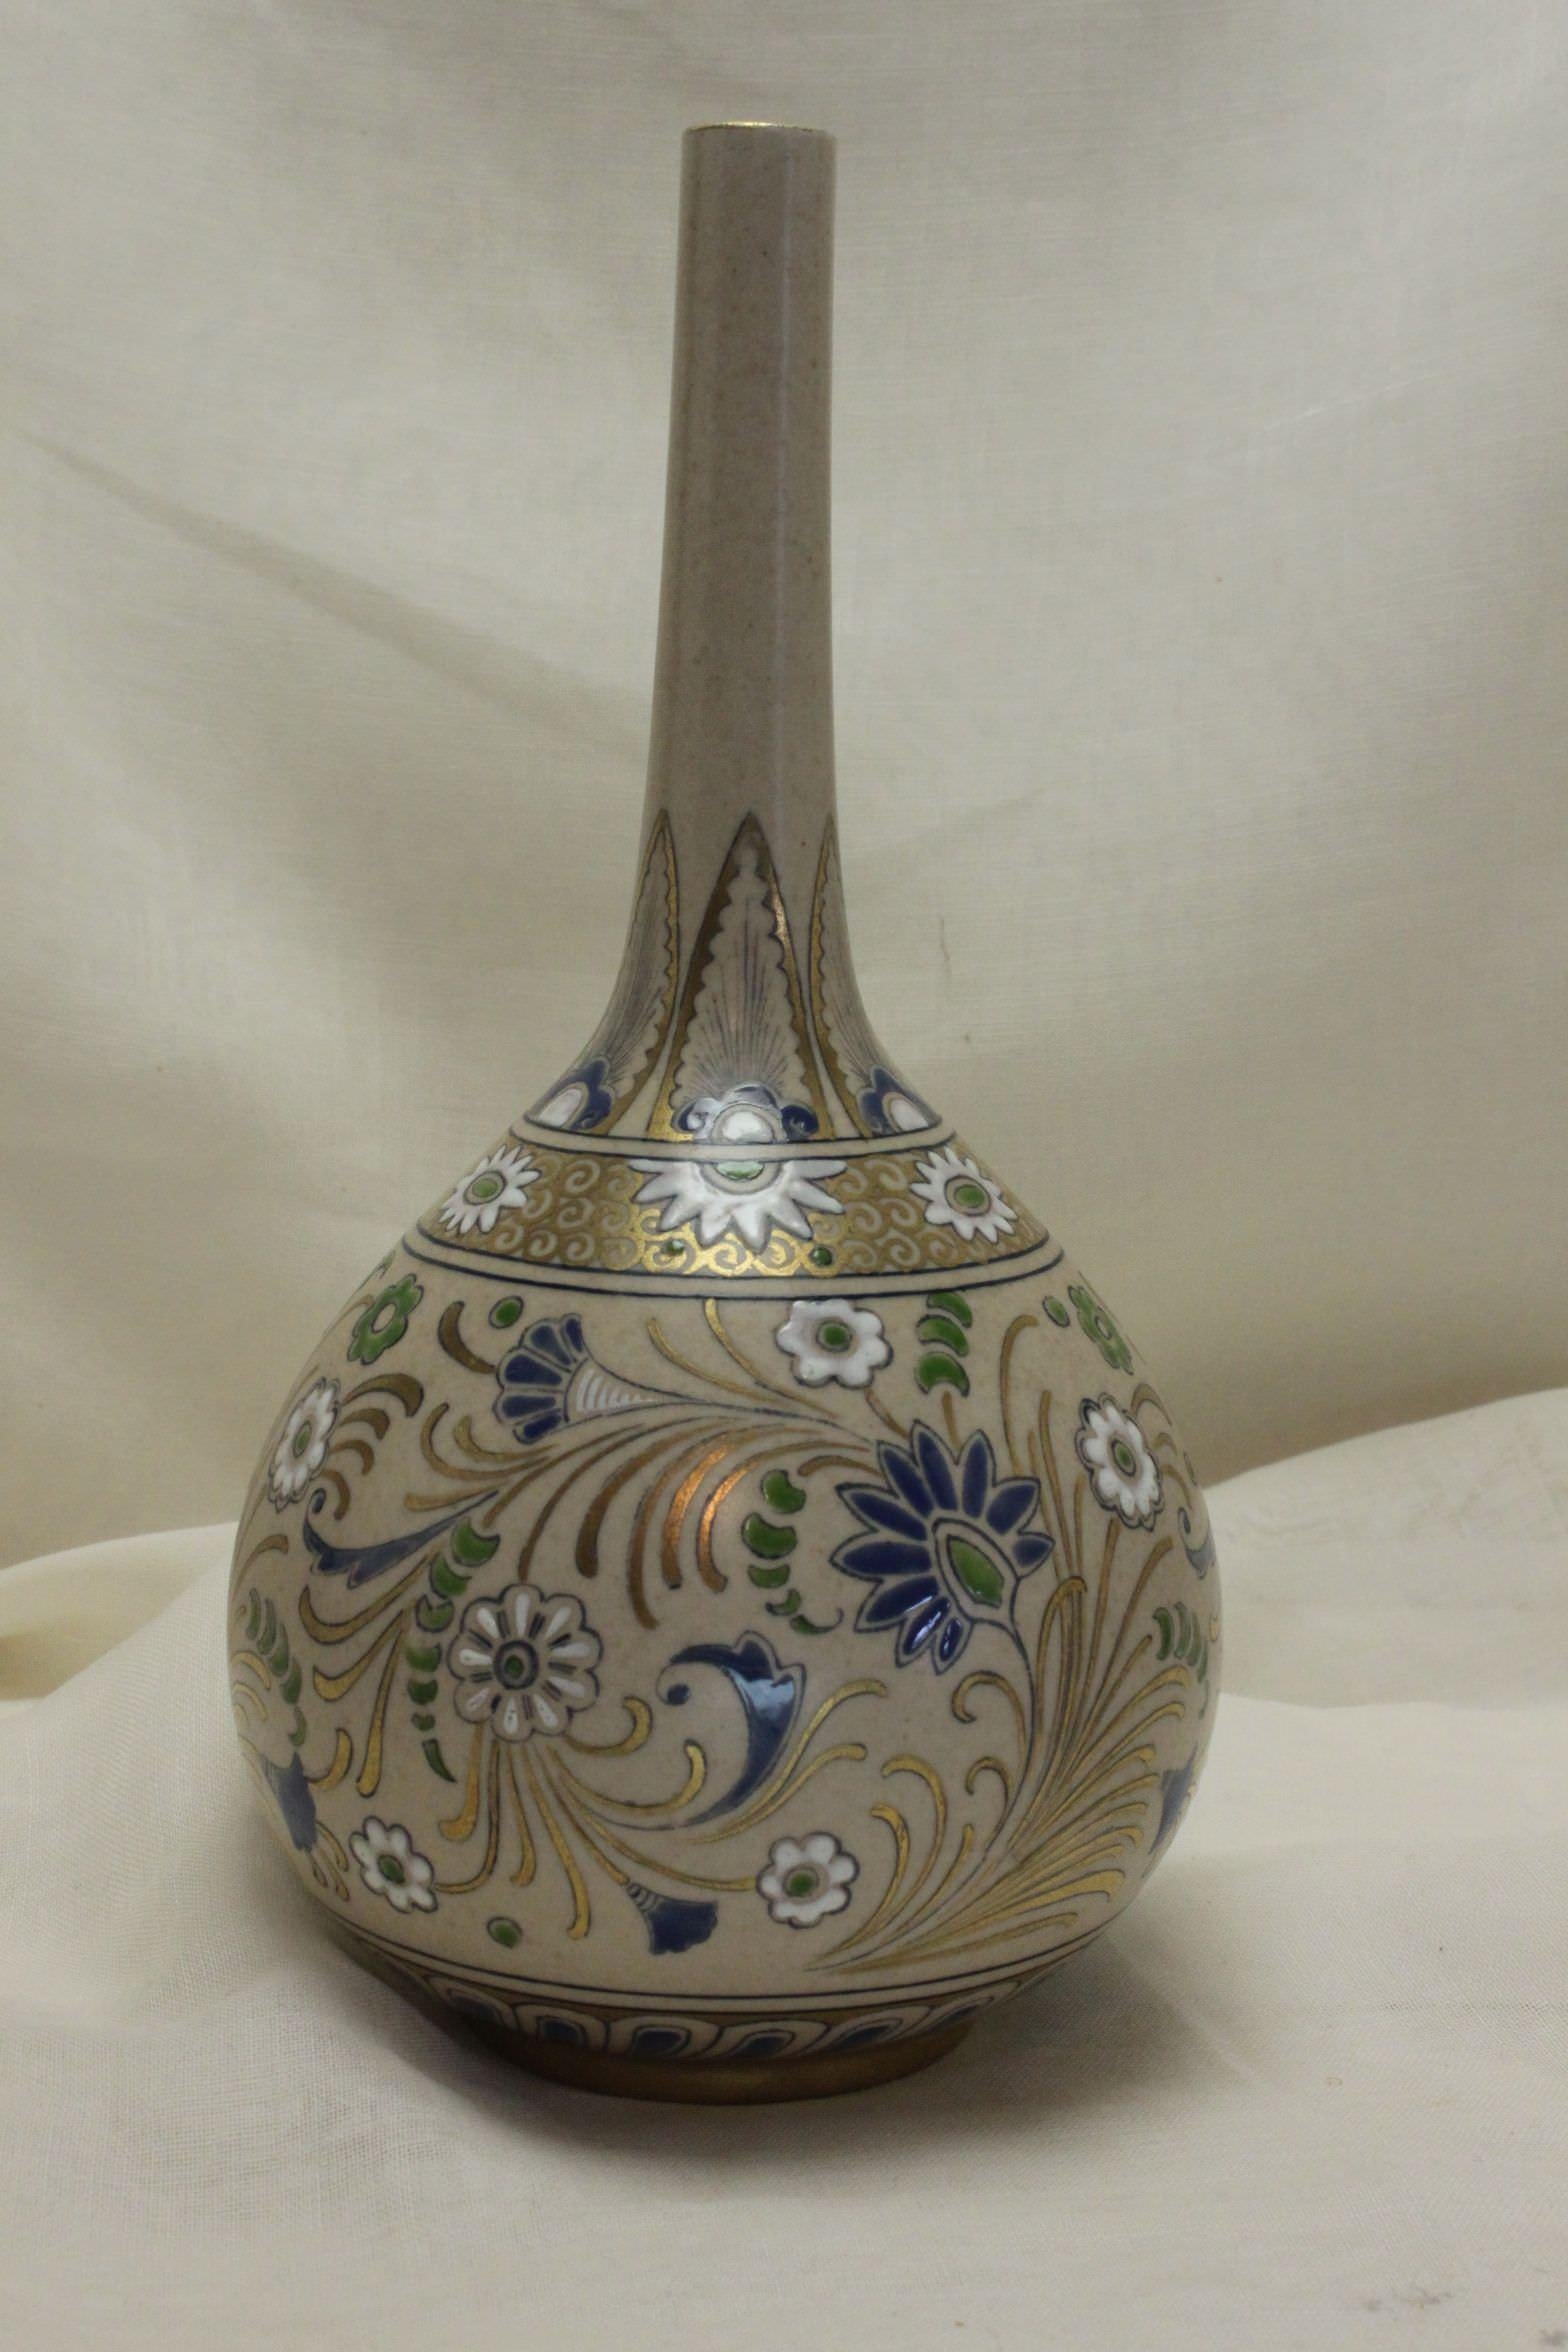 This bottle-shaped Doulton Lambeth specimen vase is from the Carrara Ware range which was a stoneware range of moderate output made between about 1887 and 1903. This vase was designed by Mildred B Smallfield (1862-?) who was listed as a senior